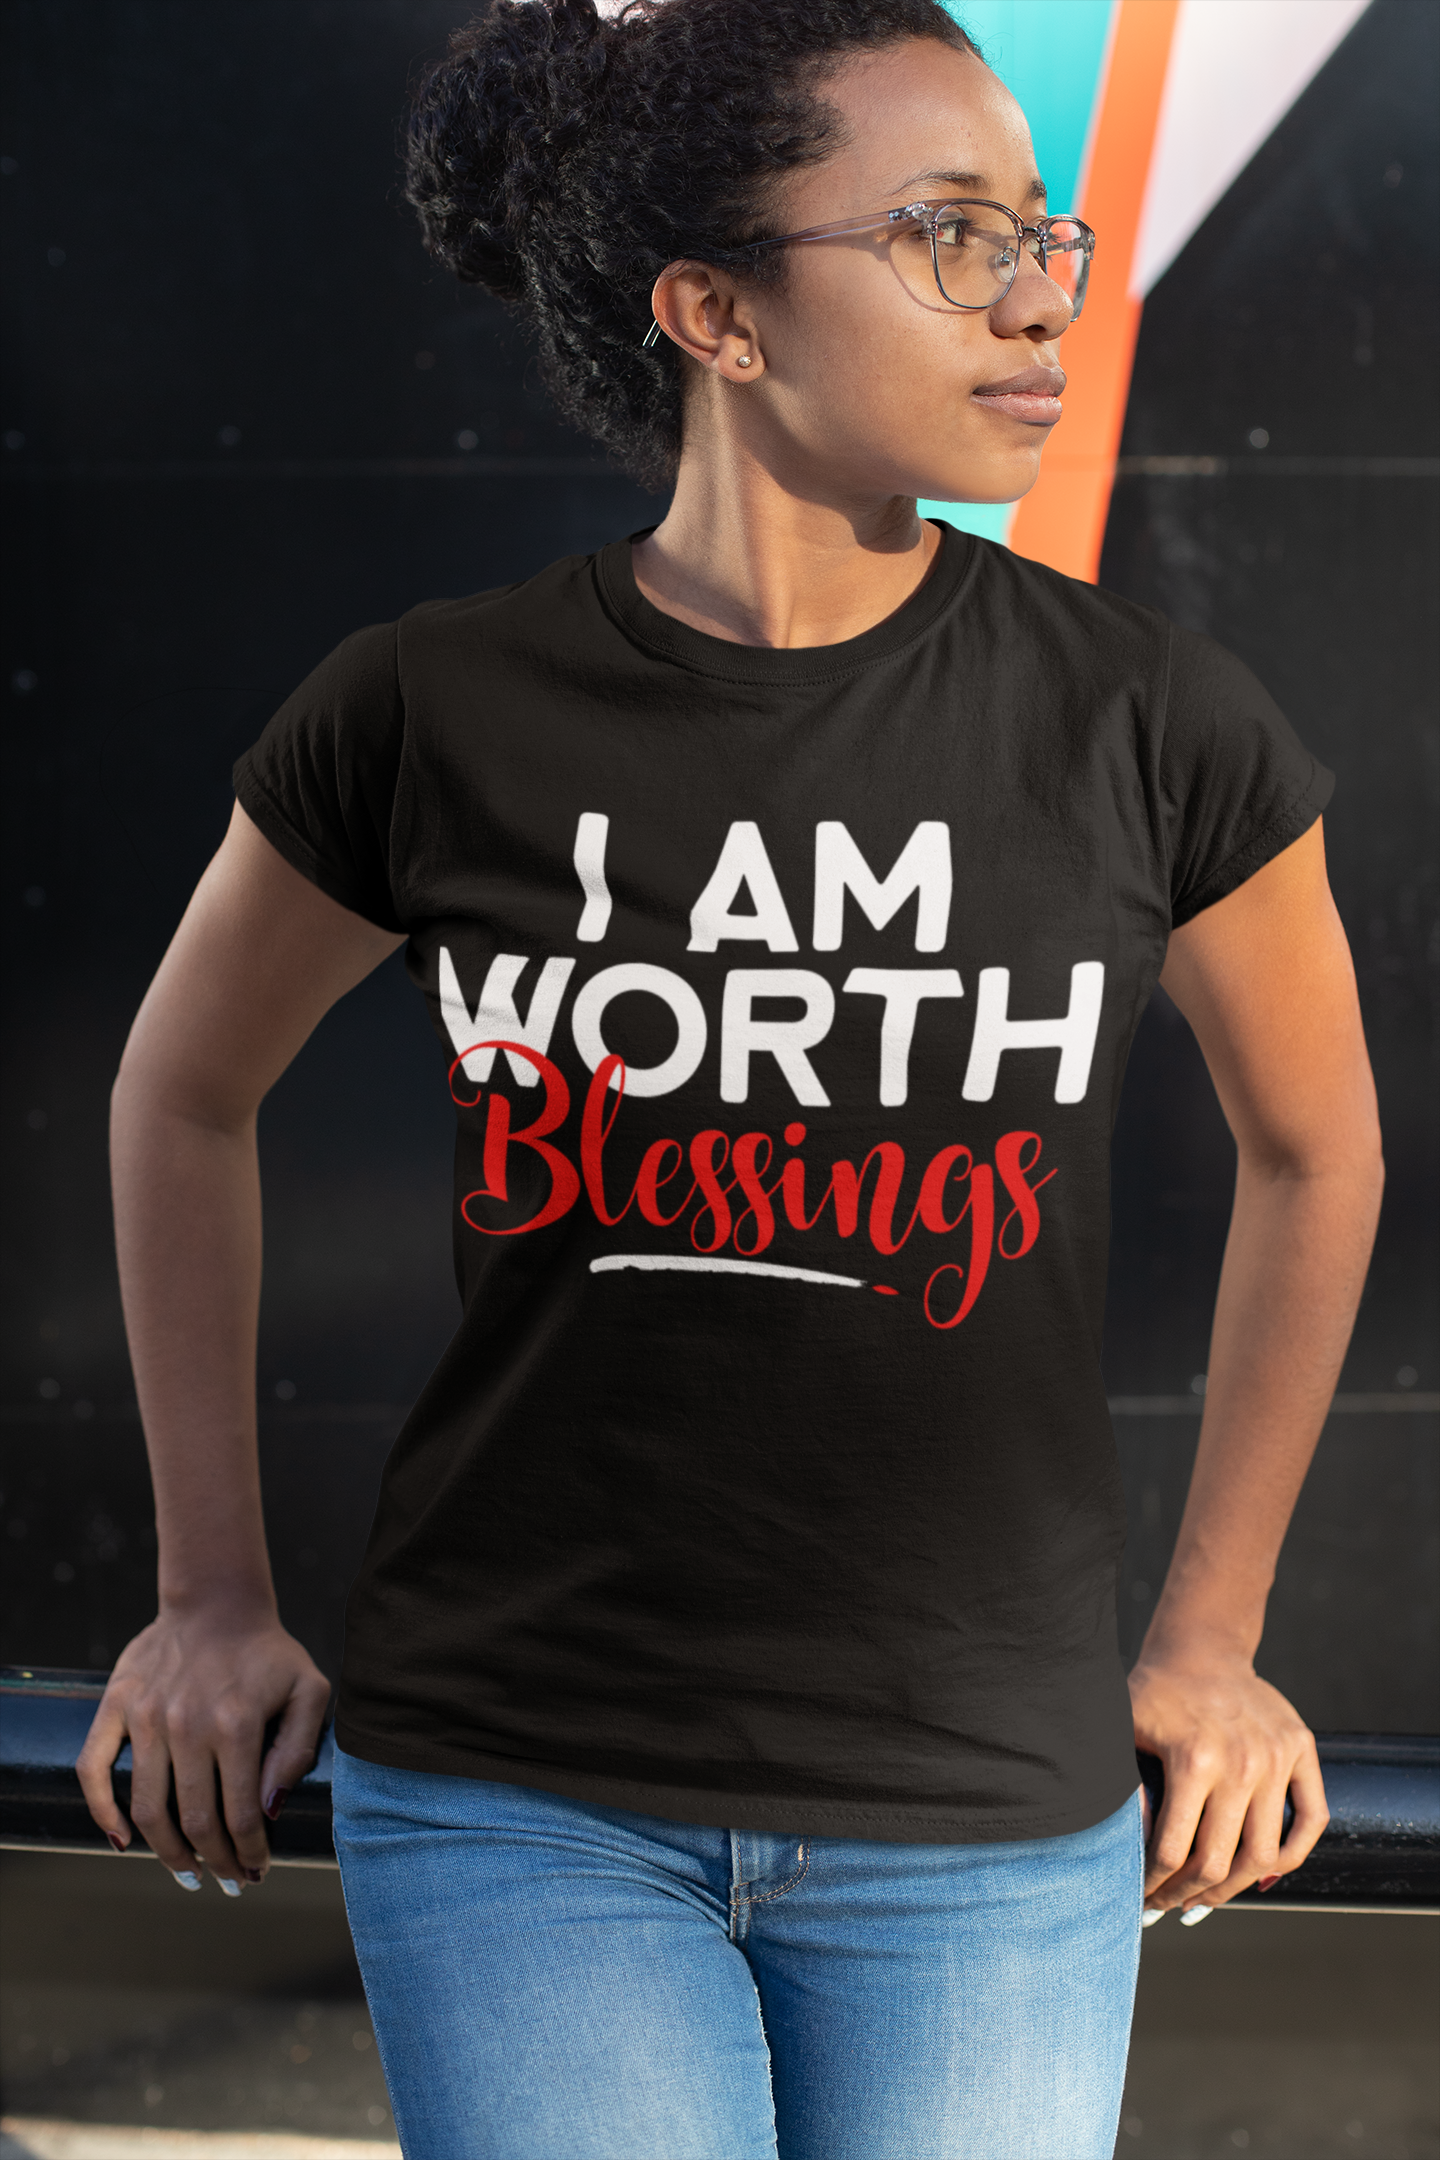 I AM Worth Blessings T-Shirt